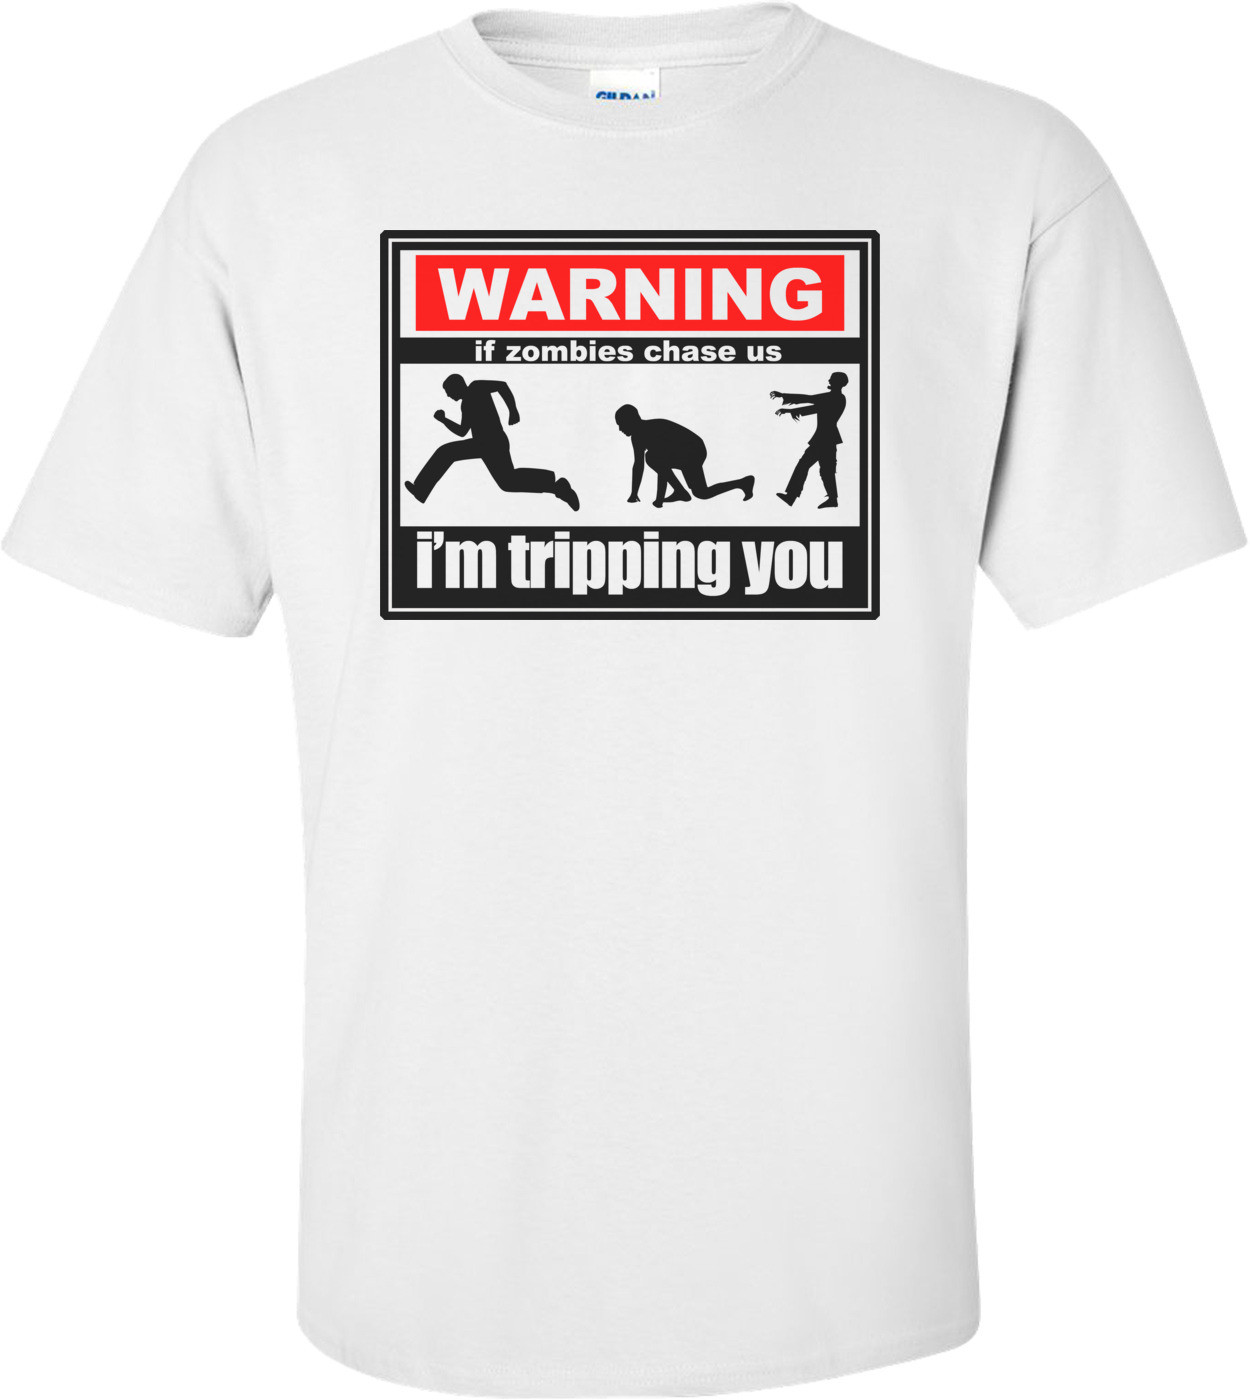 Warning: If Zombies Chase Us, I'm Tripping You - Cool Zombie Shirt